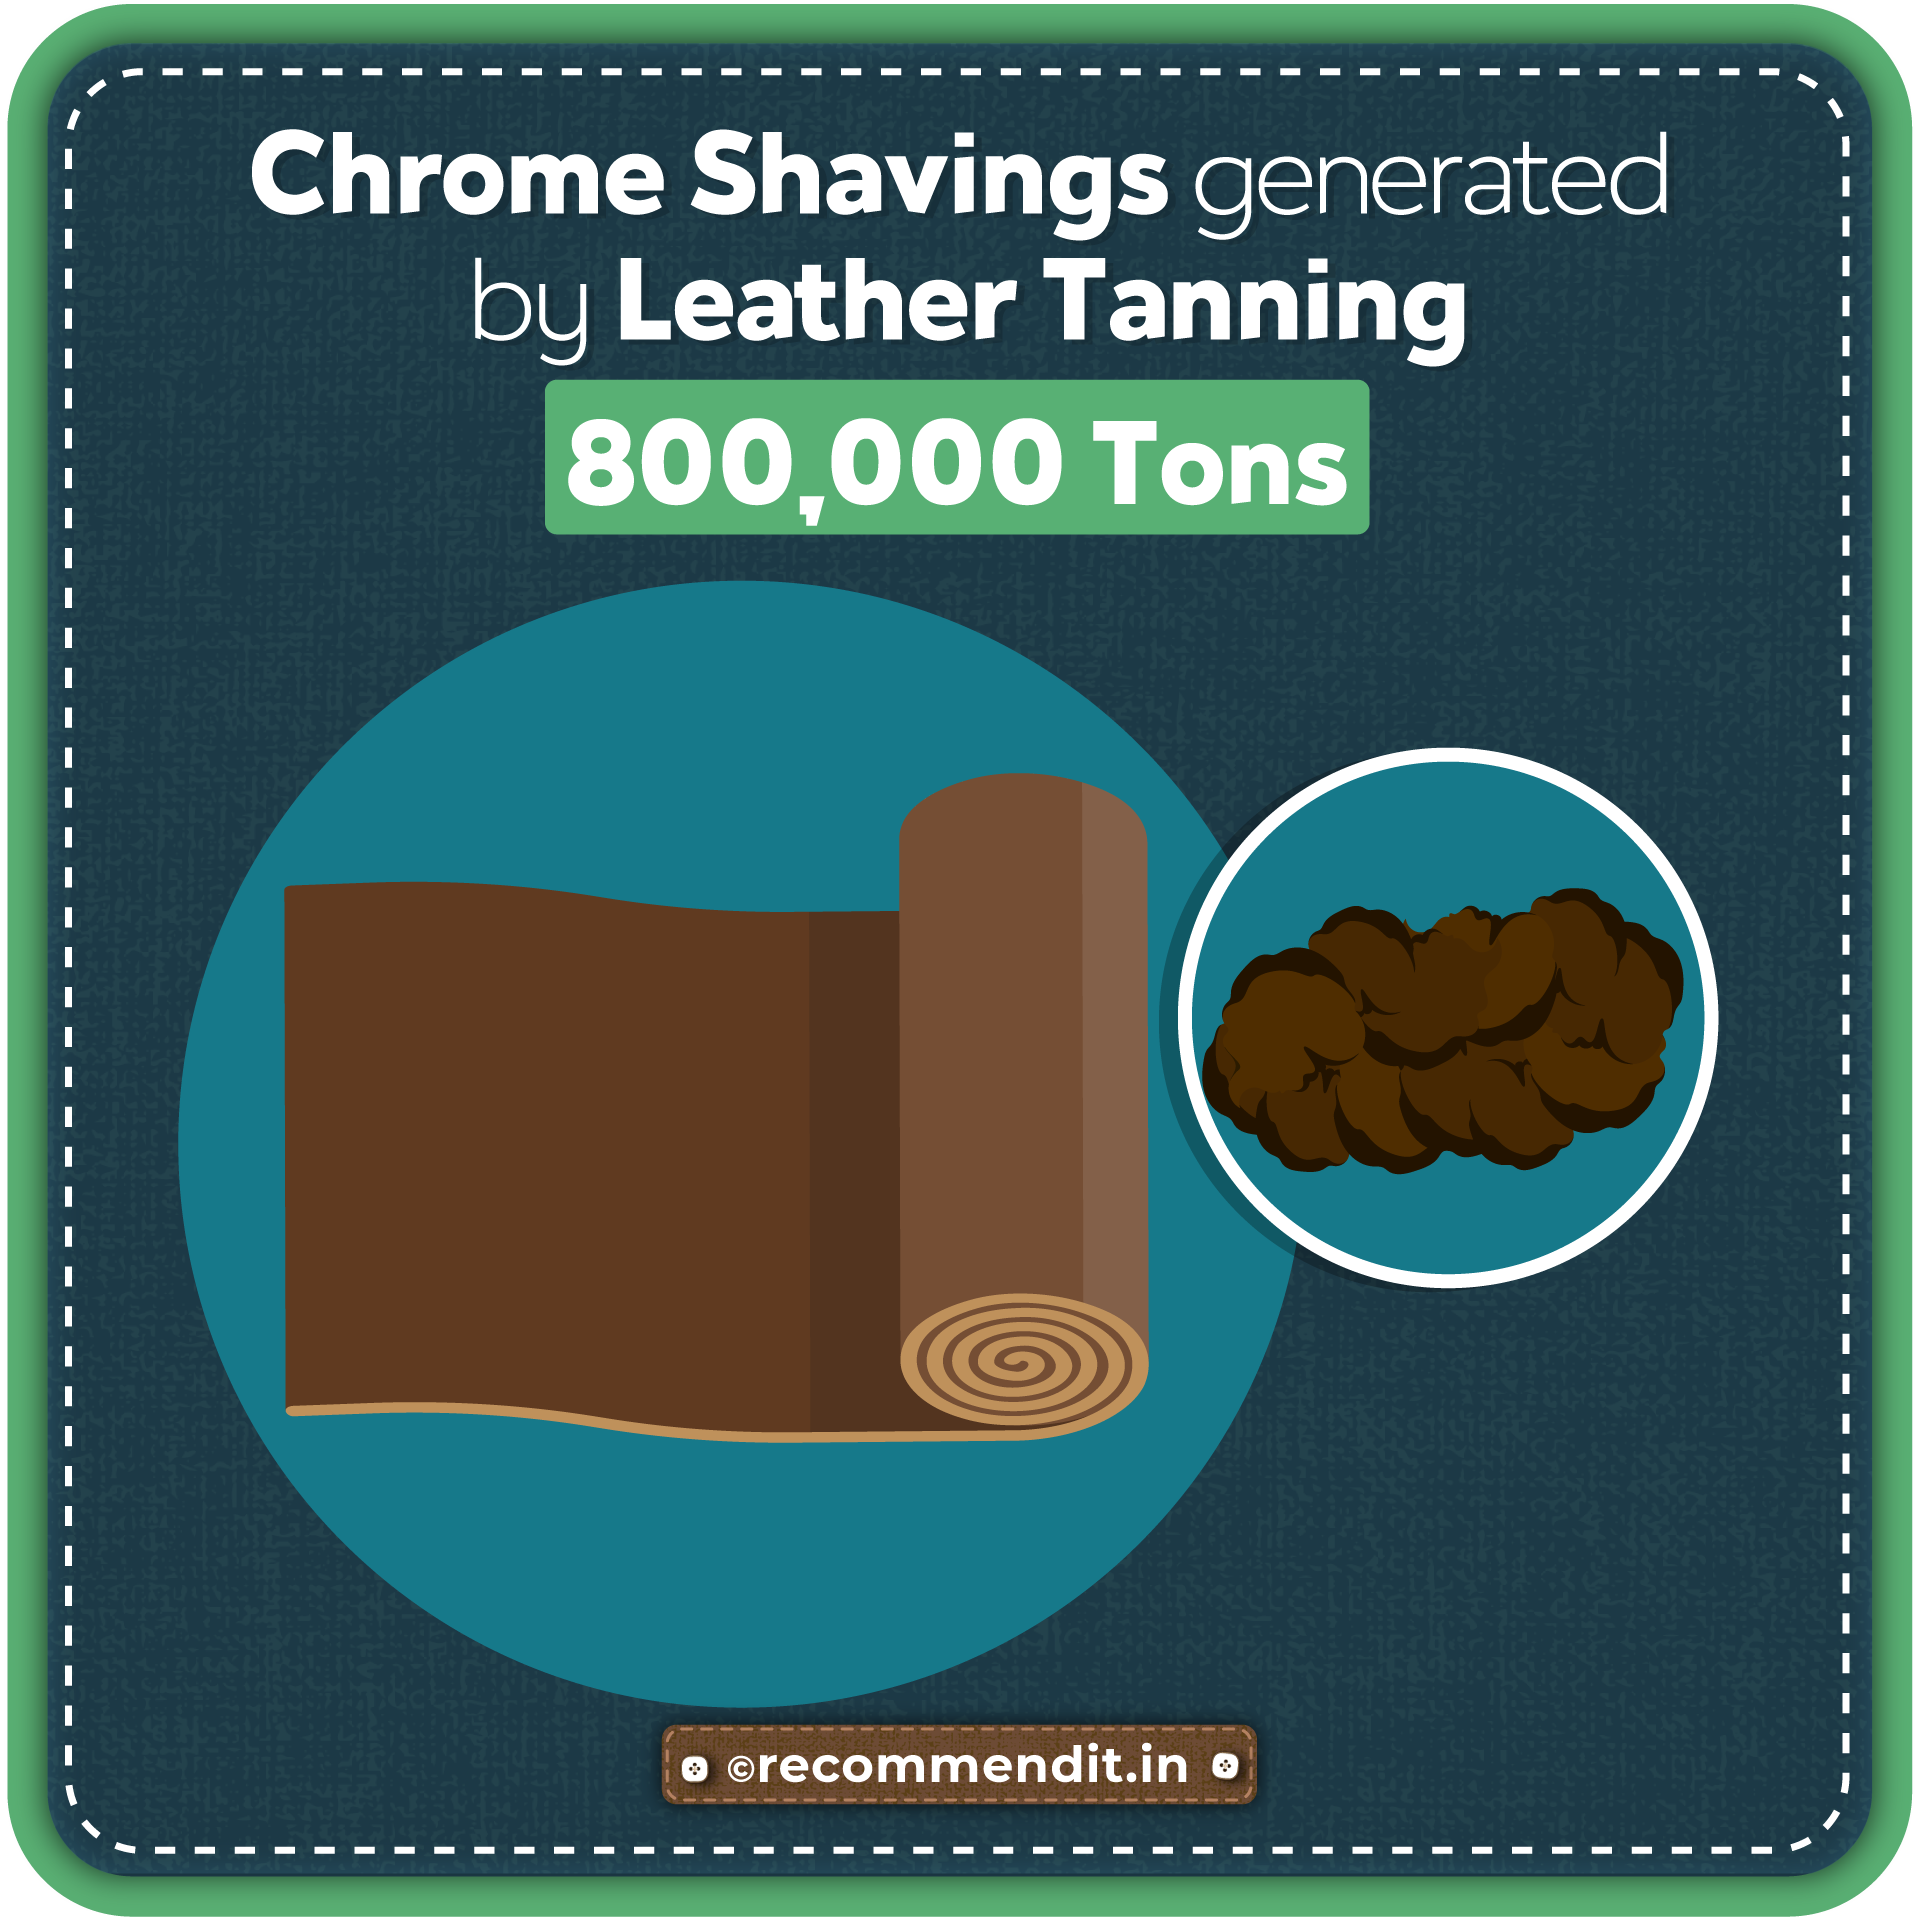 Chrome shavings generated by leather tanning